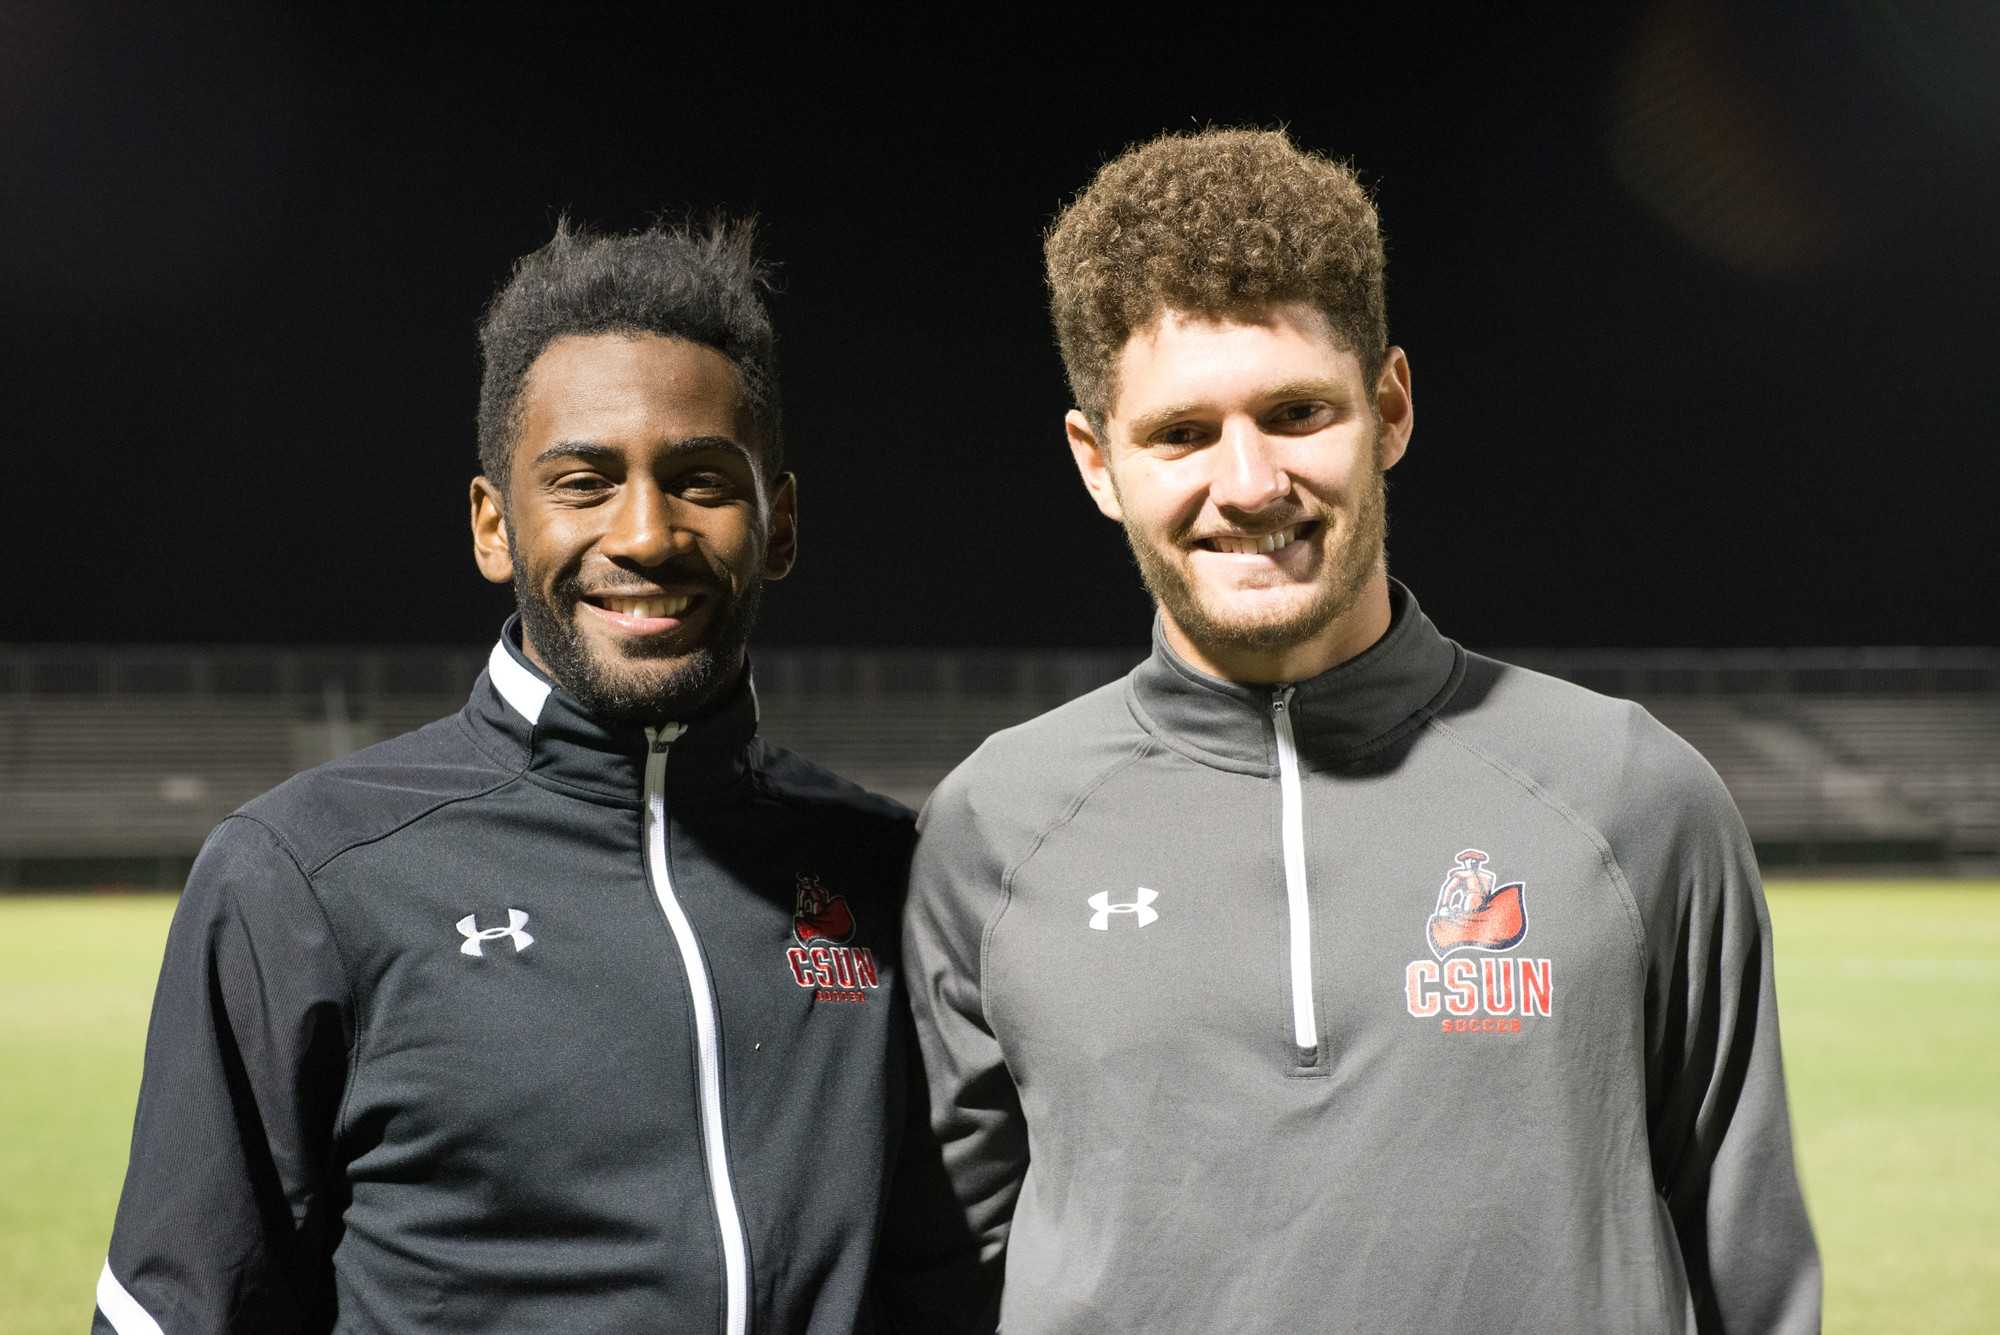 Two brothers pictured on the matador soccer field